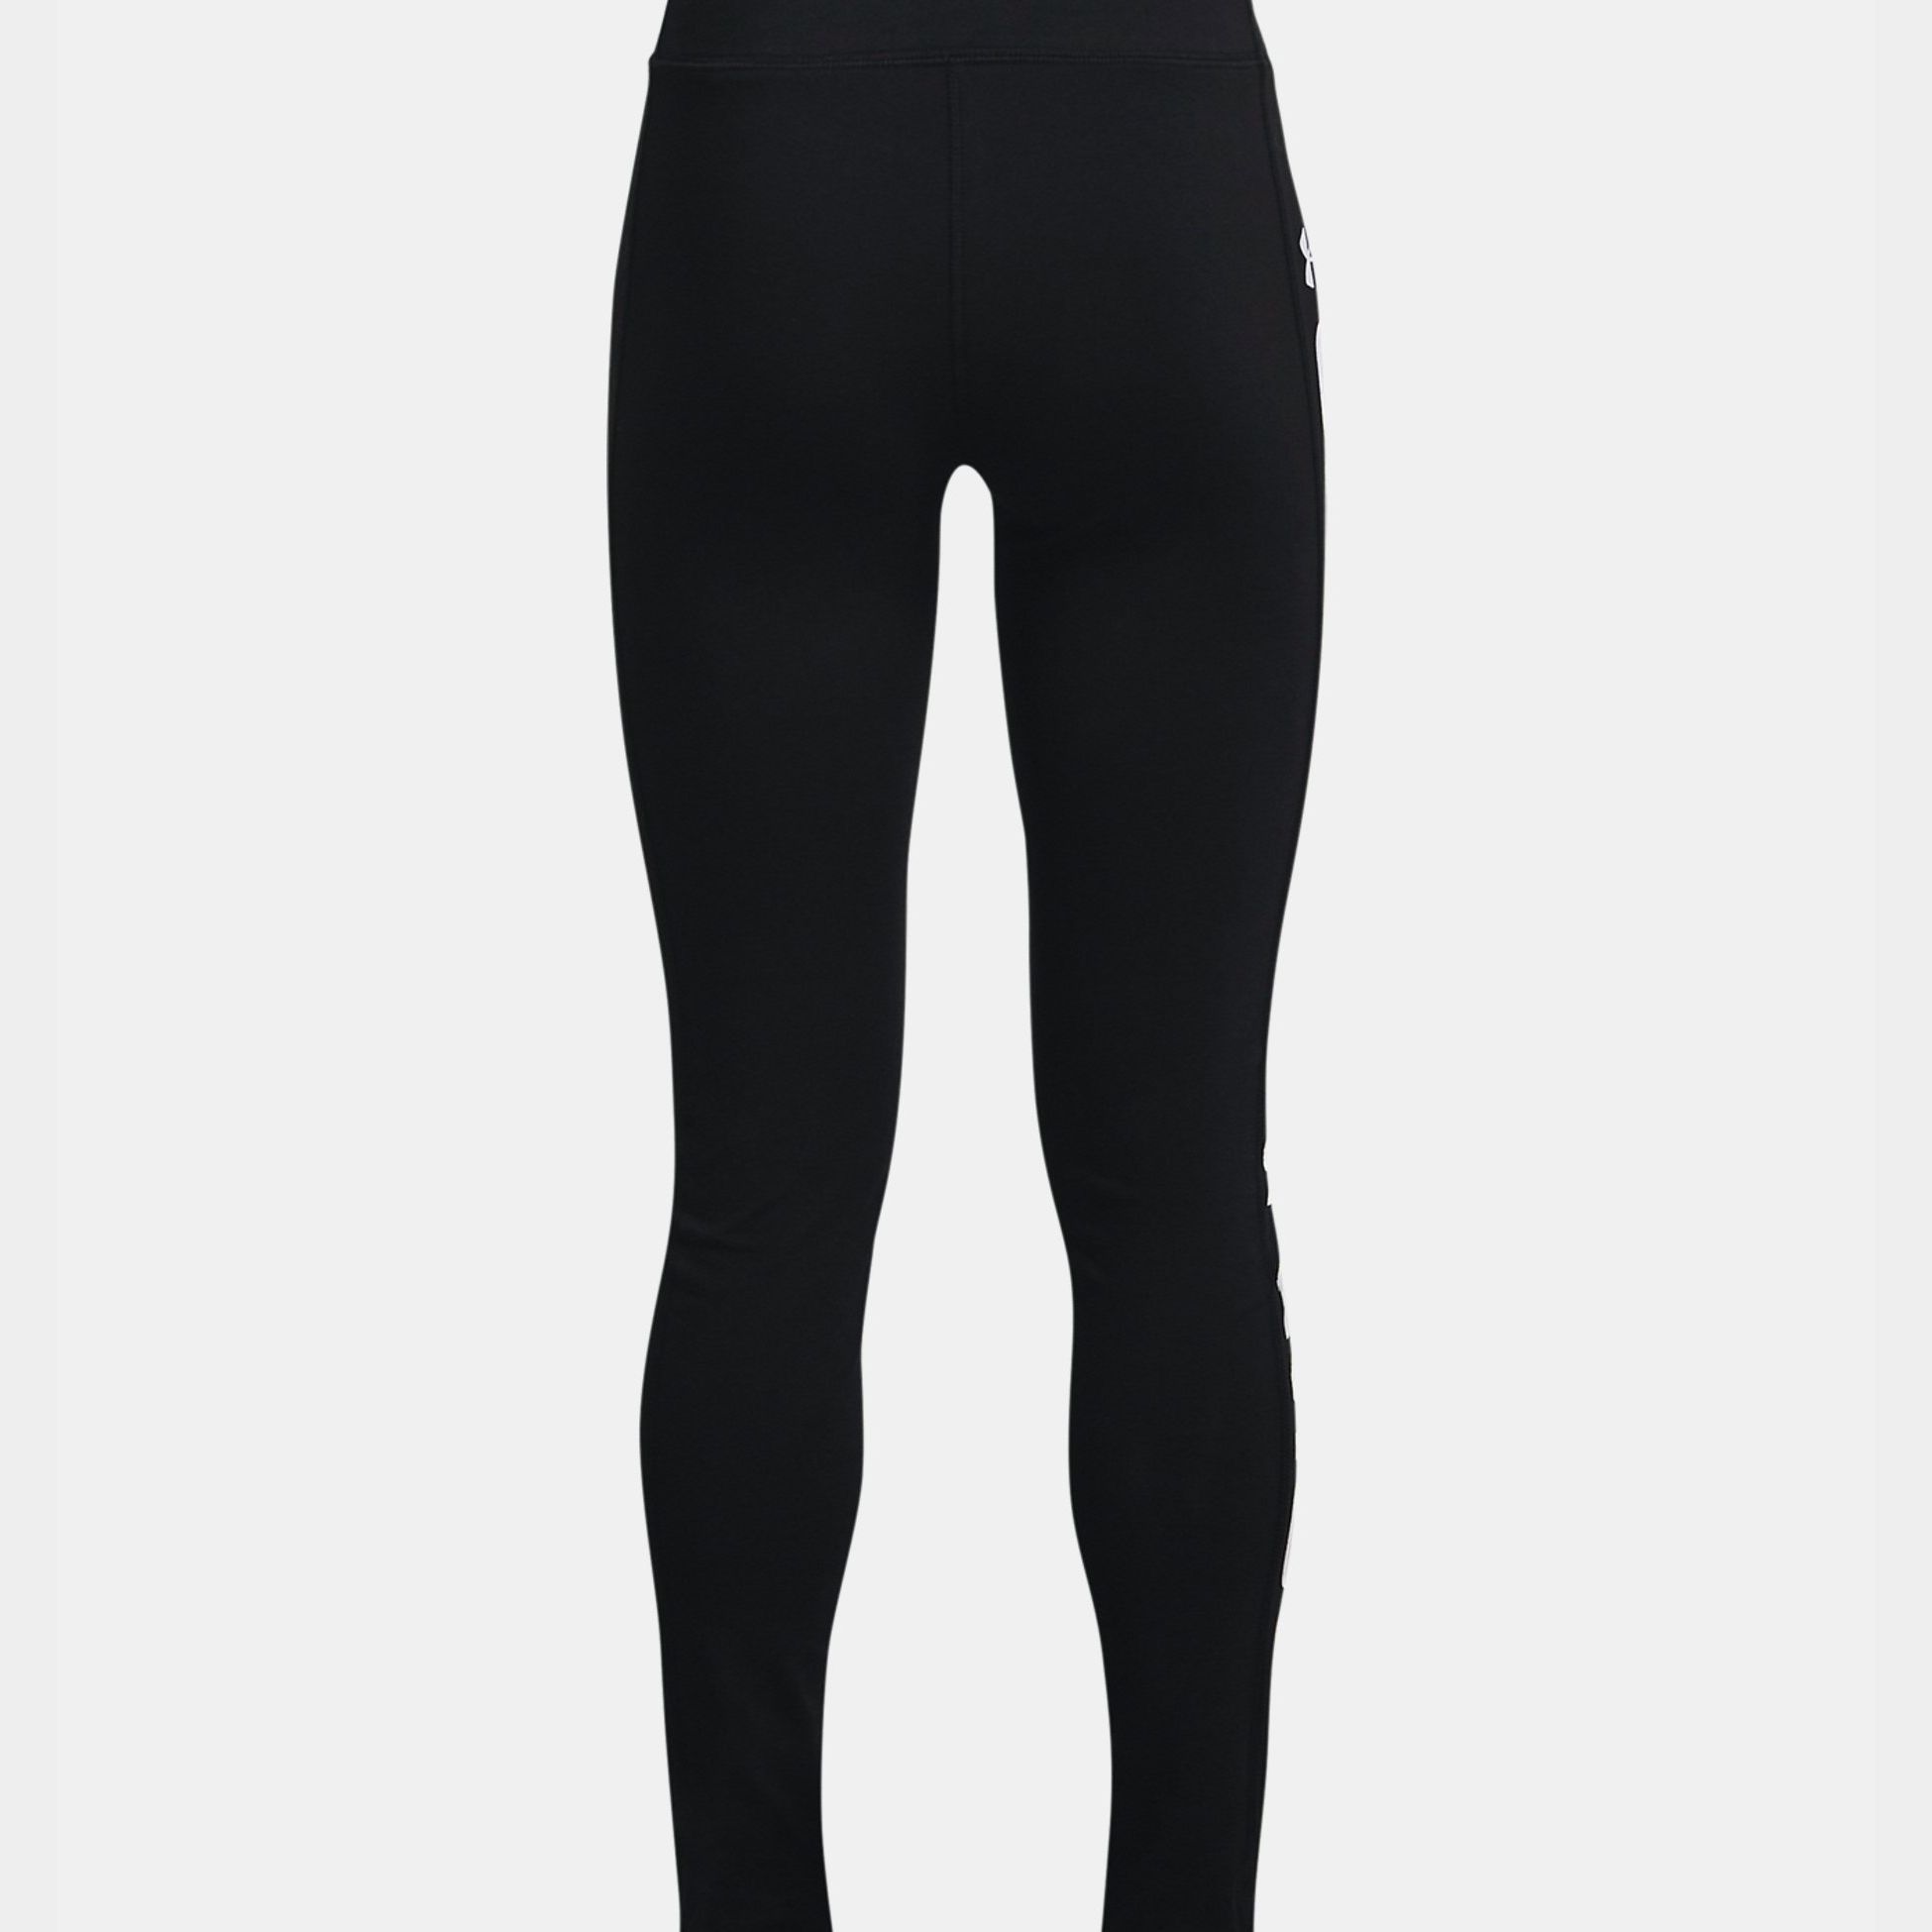 Brand New Under Armour Girls Active Leggings Grey MSRP $34.99 